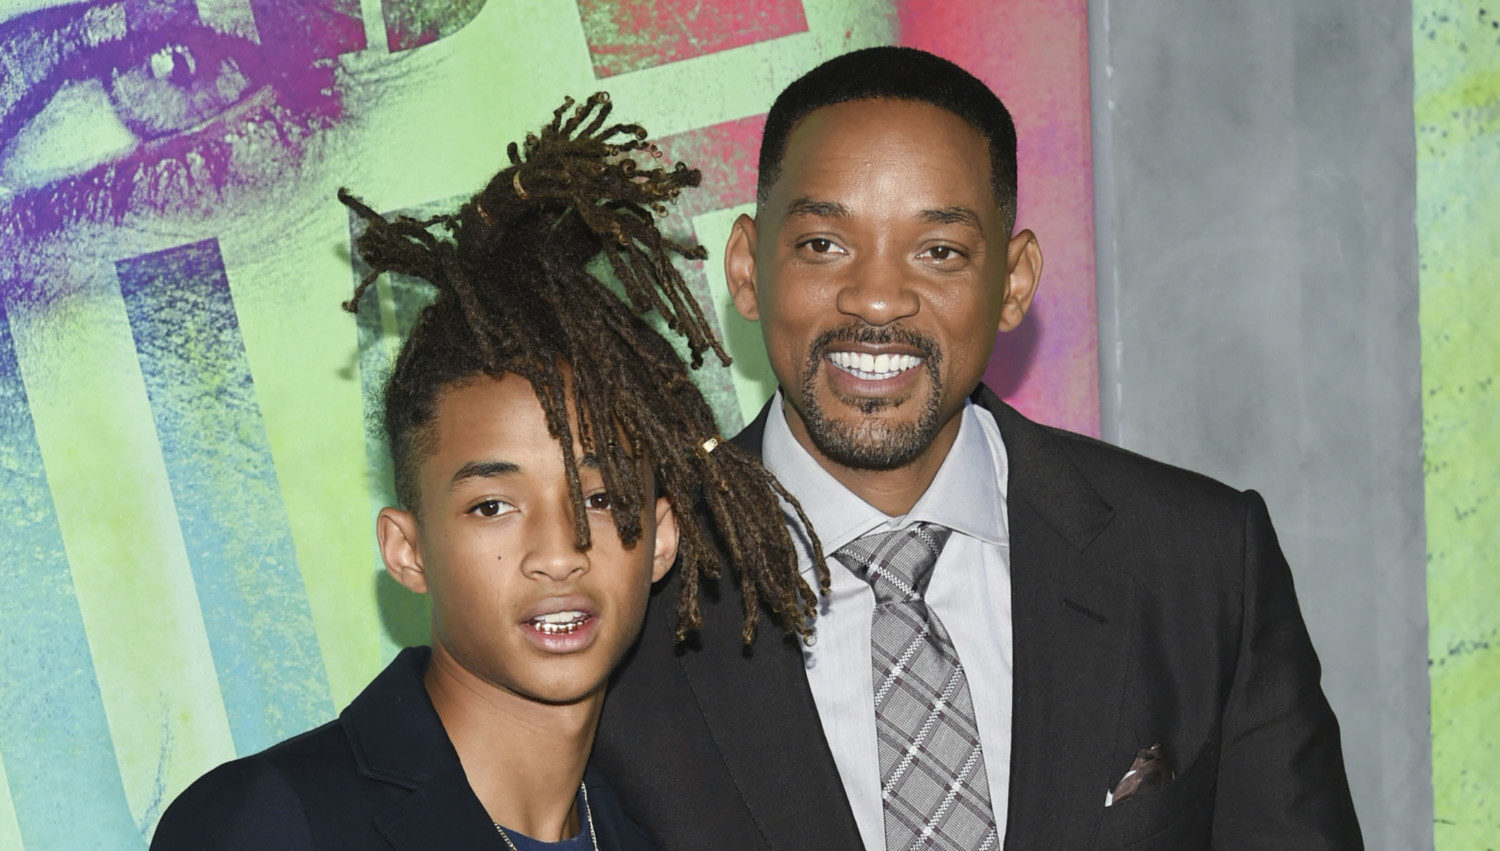 Jaden Smith, Will Smith at "Suicide Squad" premiere